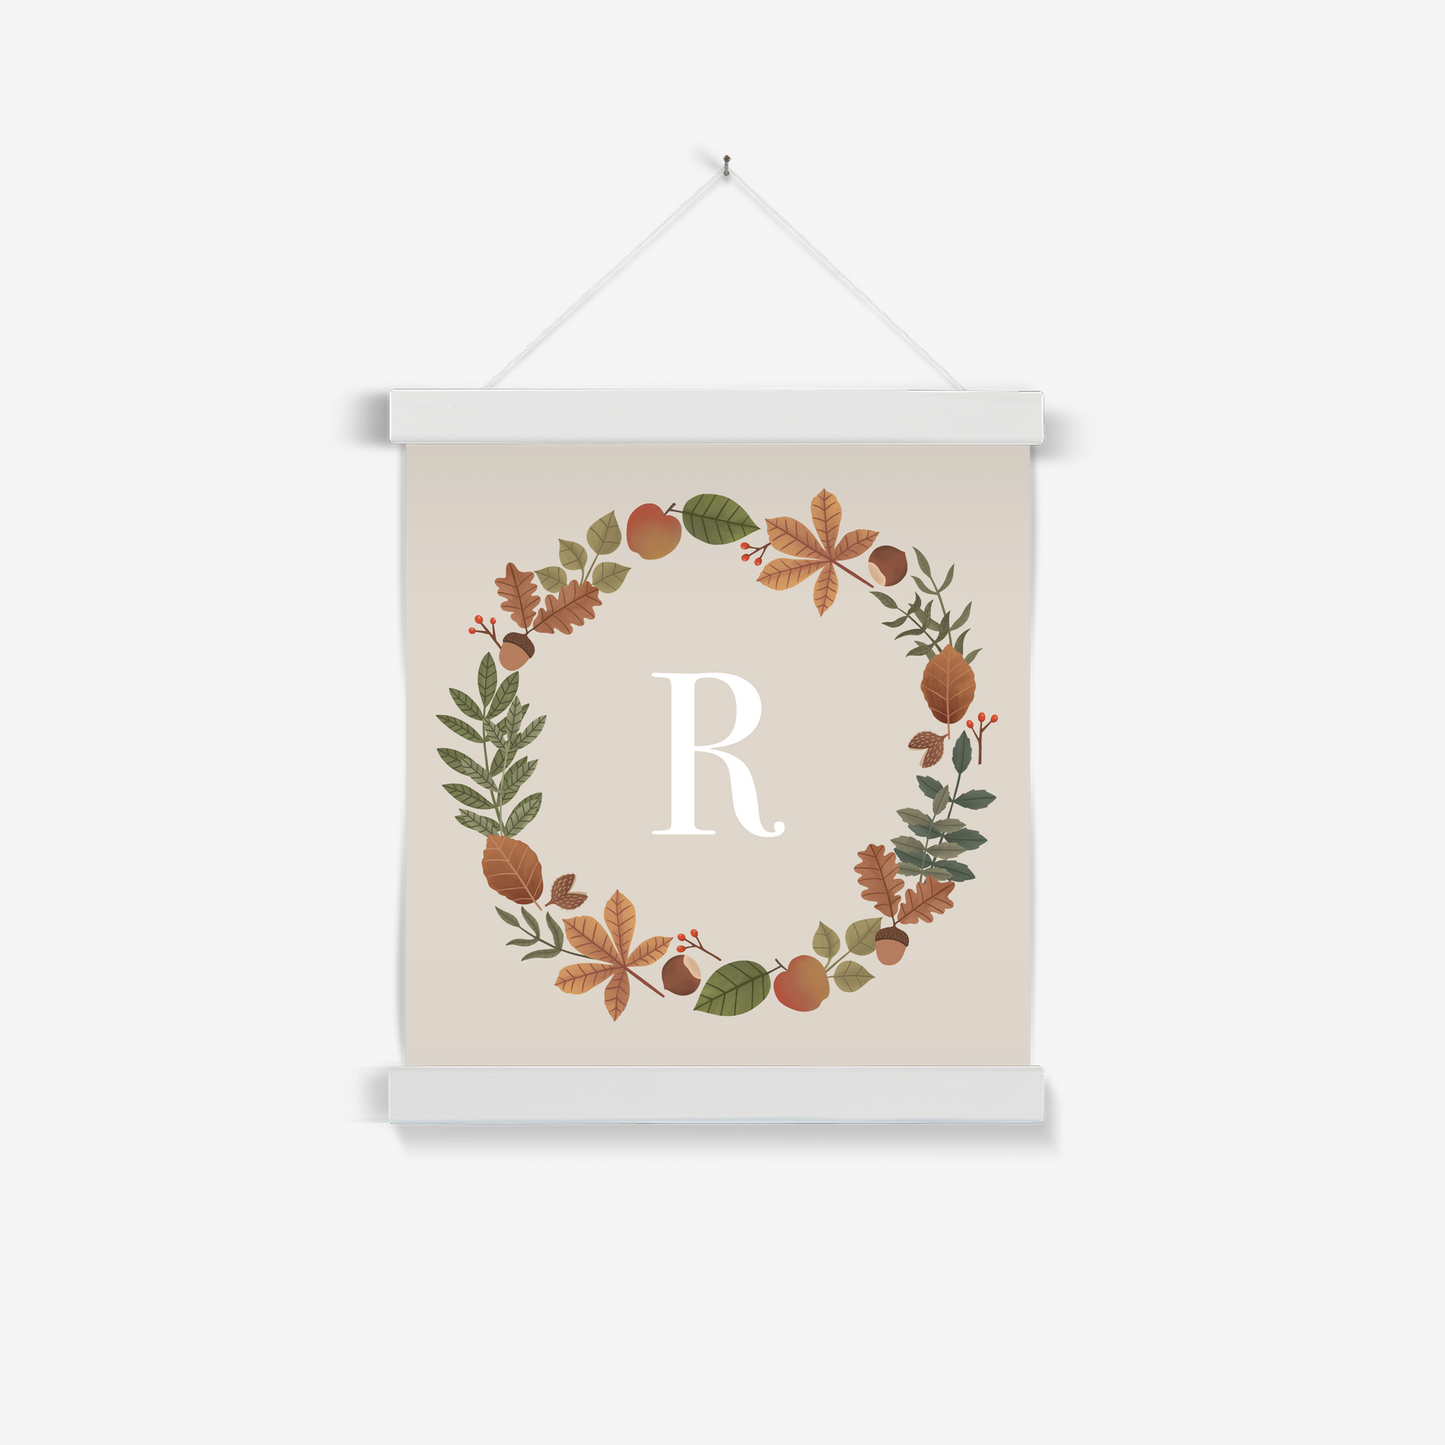 Personalised Leaf Wreath in stone / Print with Hanger